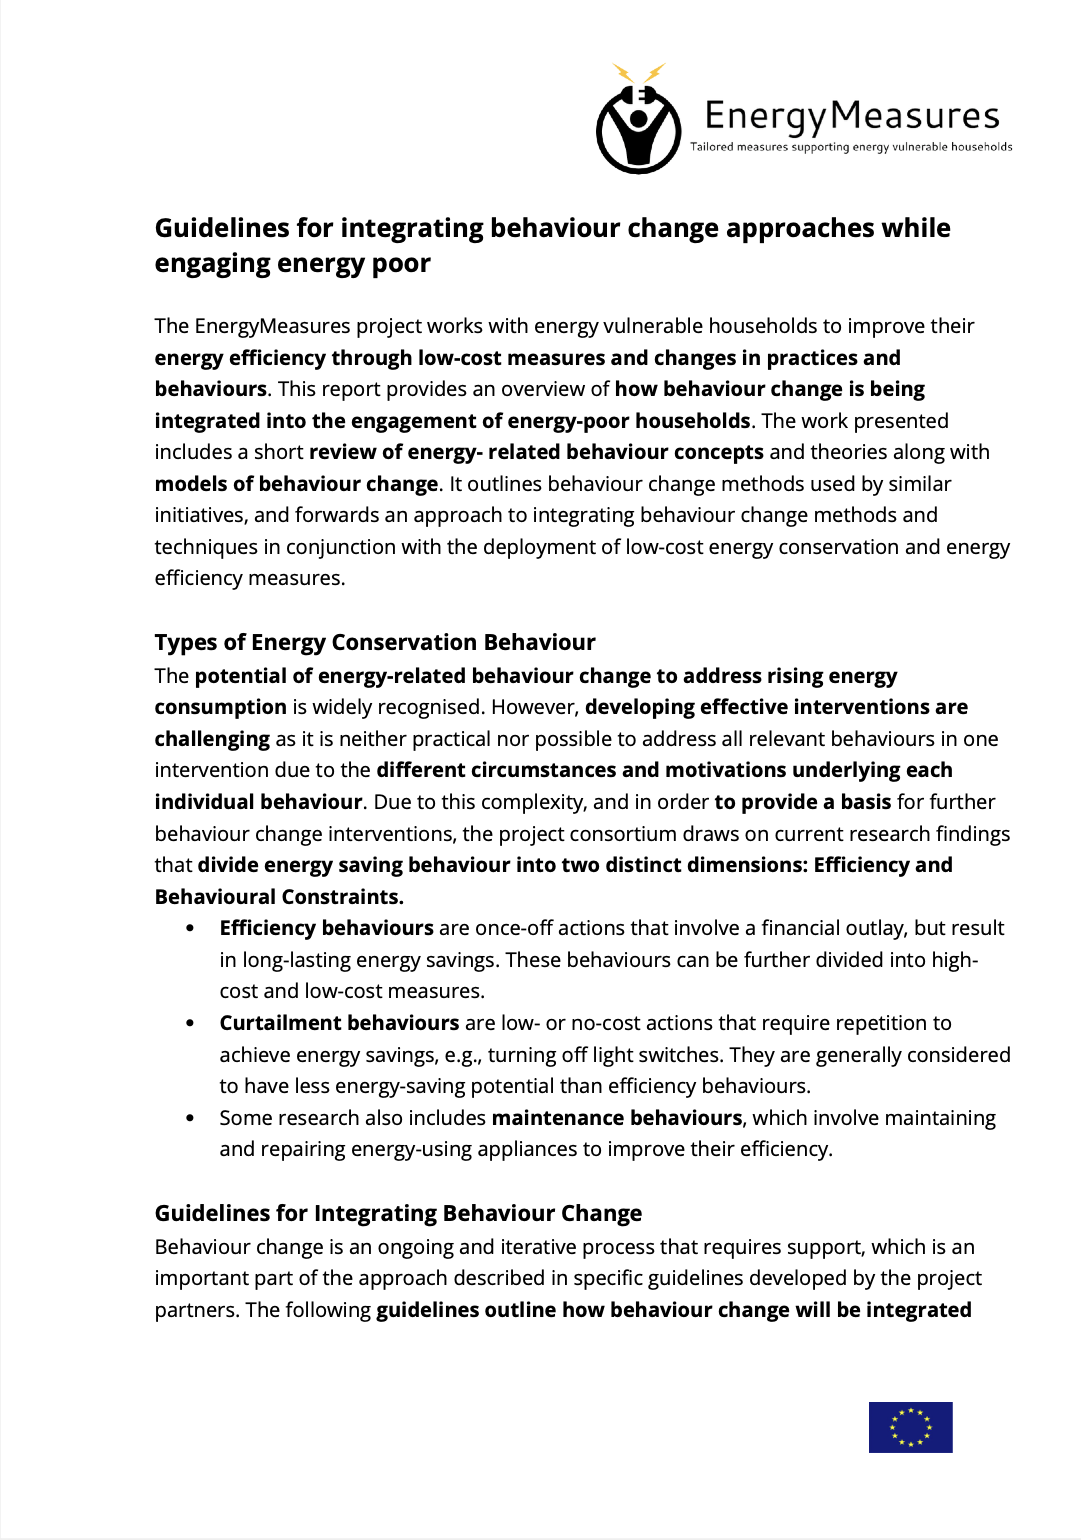 Guidelines for integrating behaviour change approaches while engaging energy poor